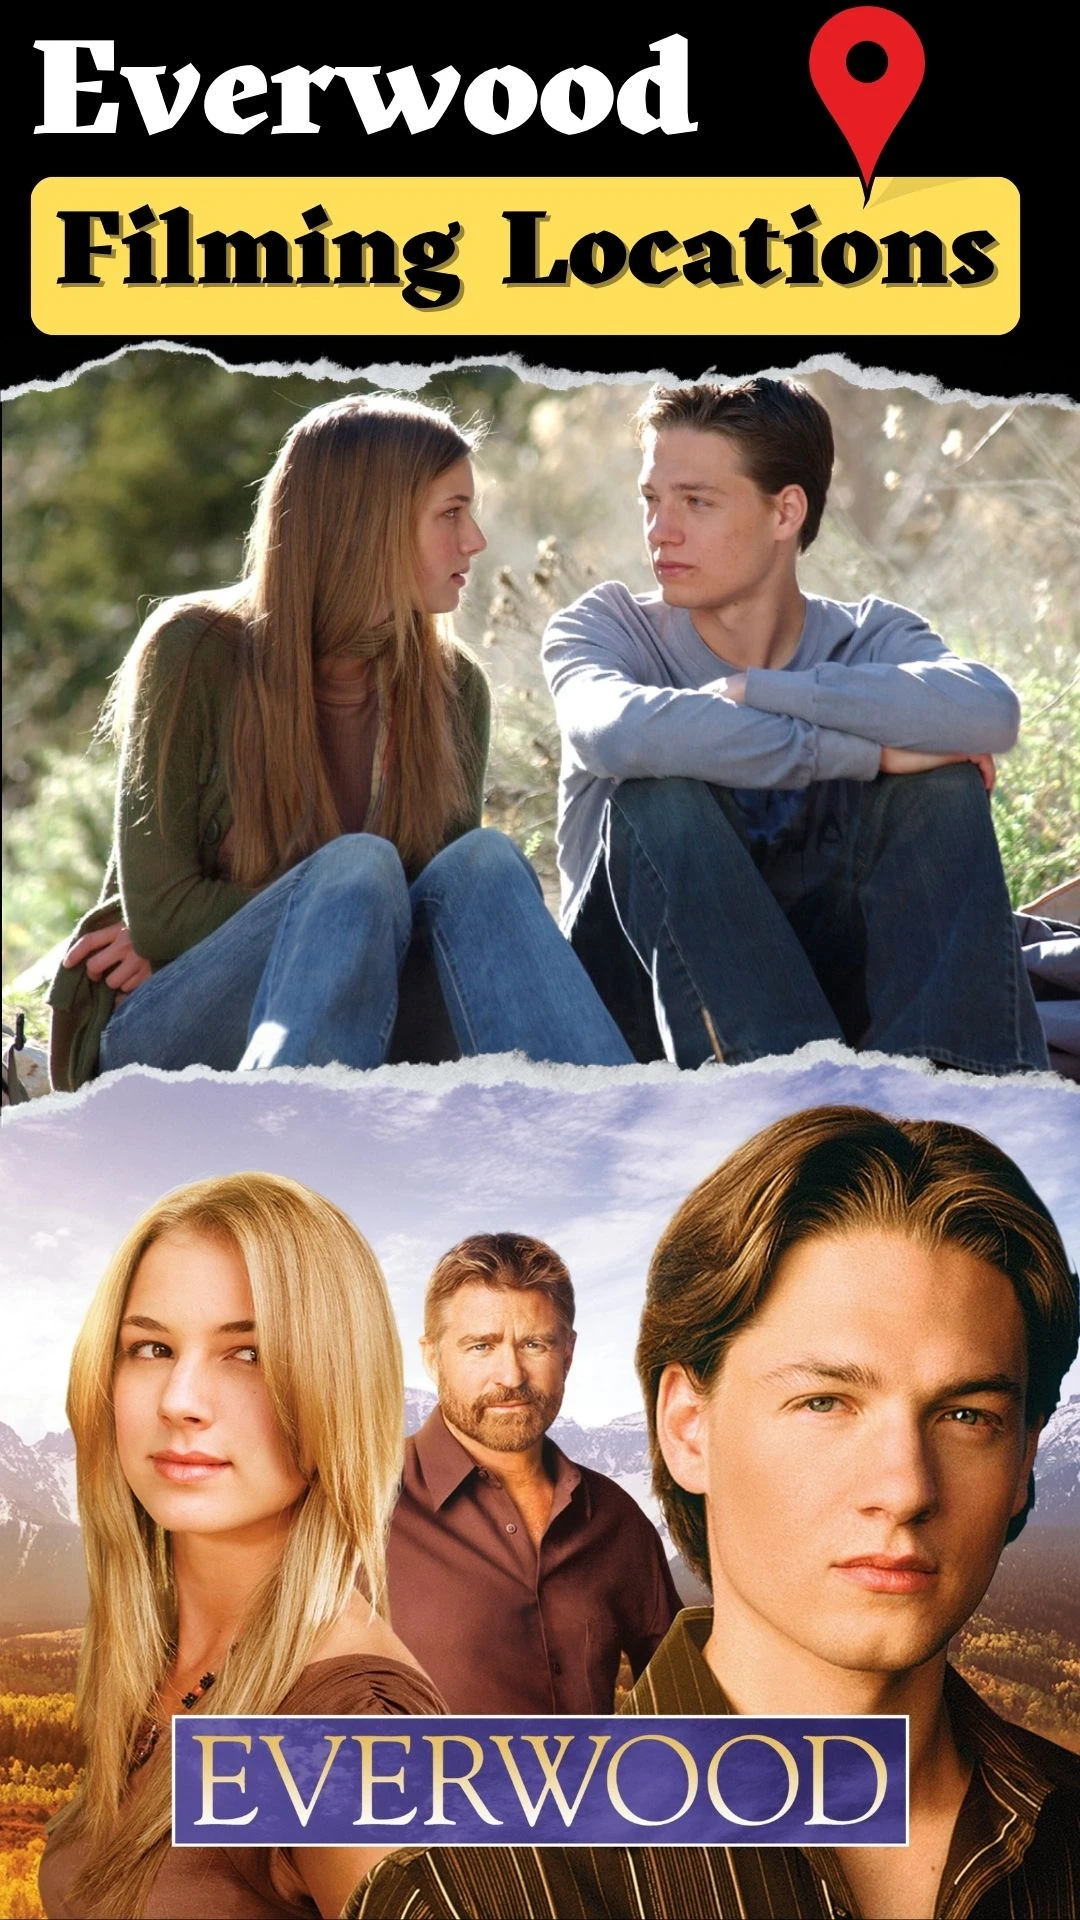 Everwood Filming Locations